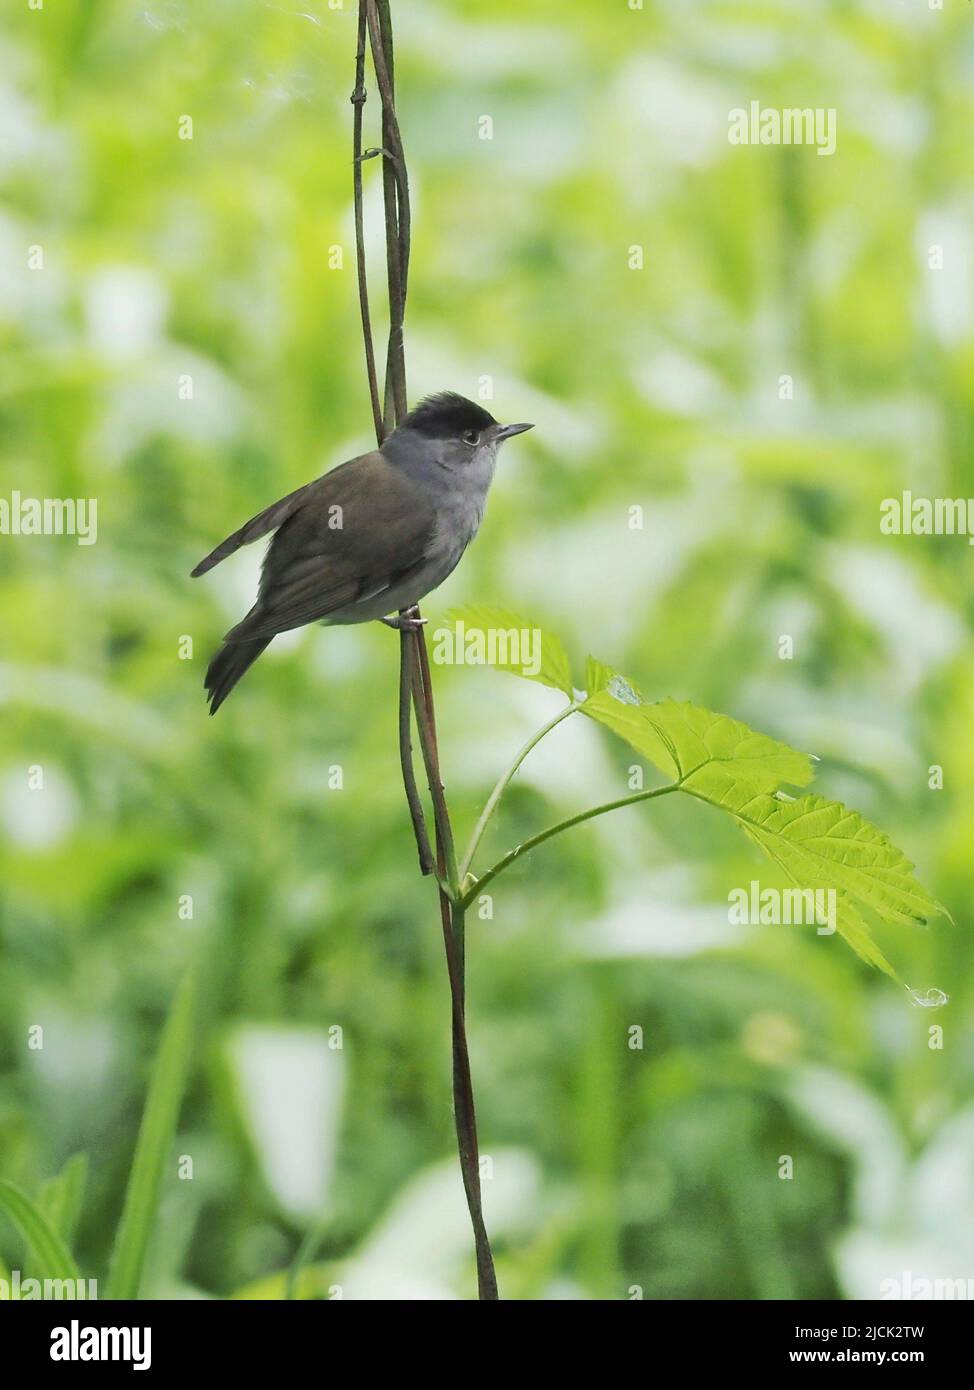 A blackcap (Sylvia atricapilla) perched on a branch against a green background at RSPB Fairburn Ings Stock Photo